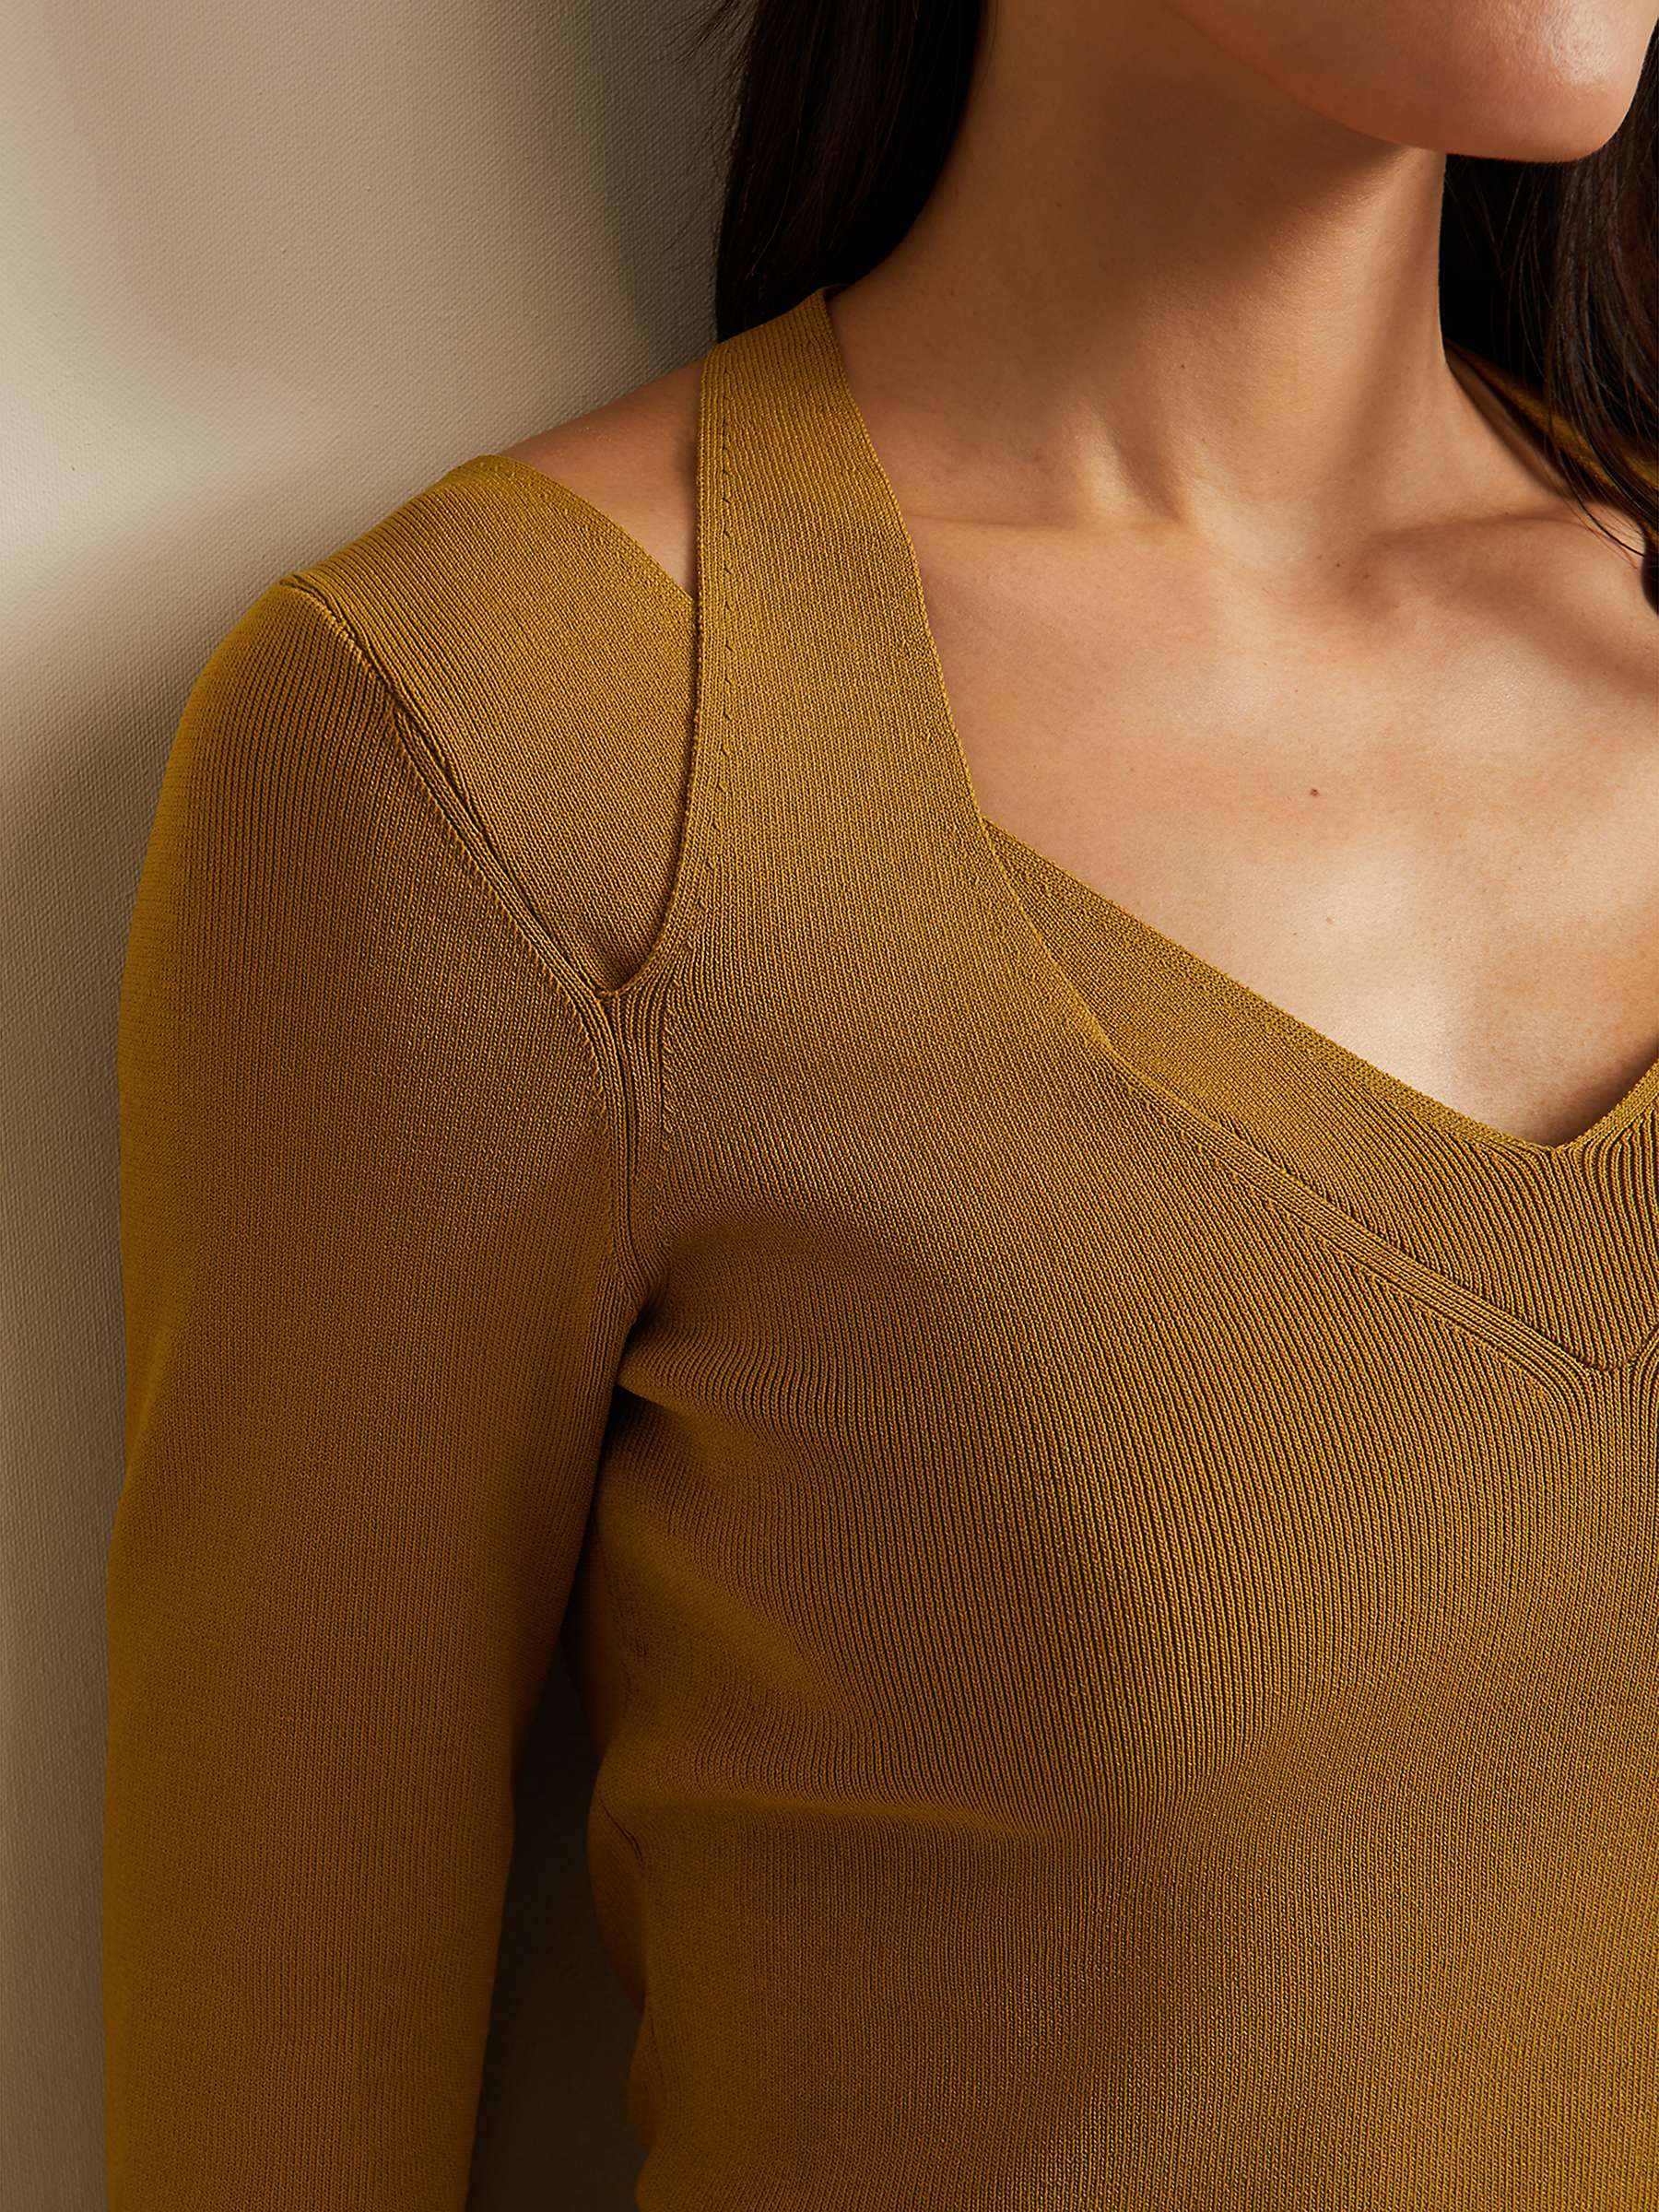 Buy Phase Eight Emily Rib Knit Cut-Out Detail Top, Olive Online at johnlewis.com